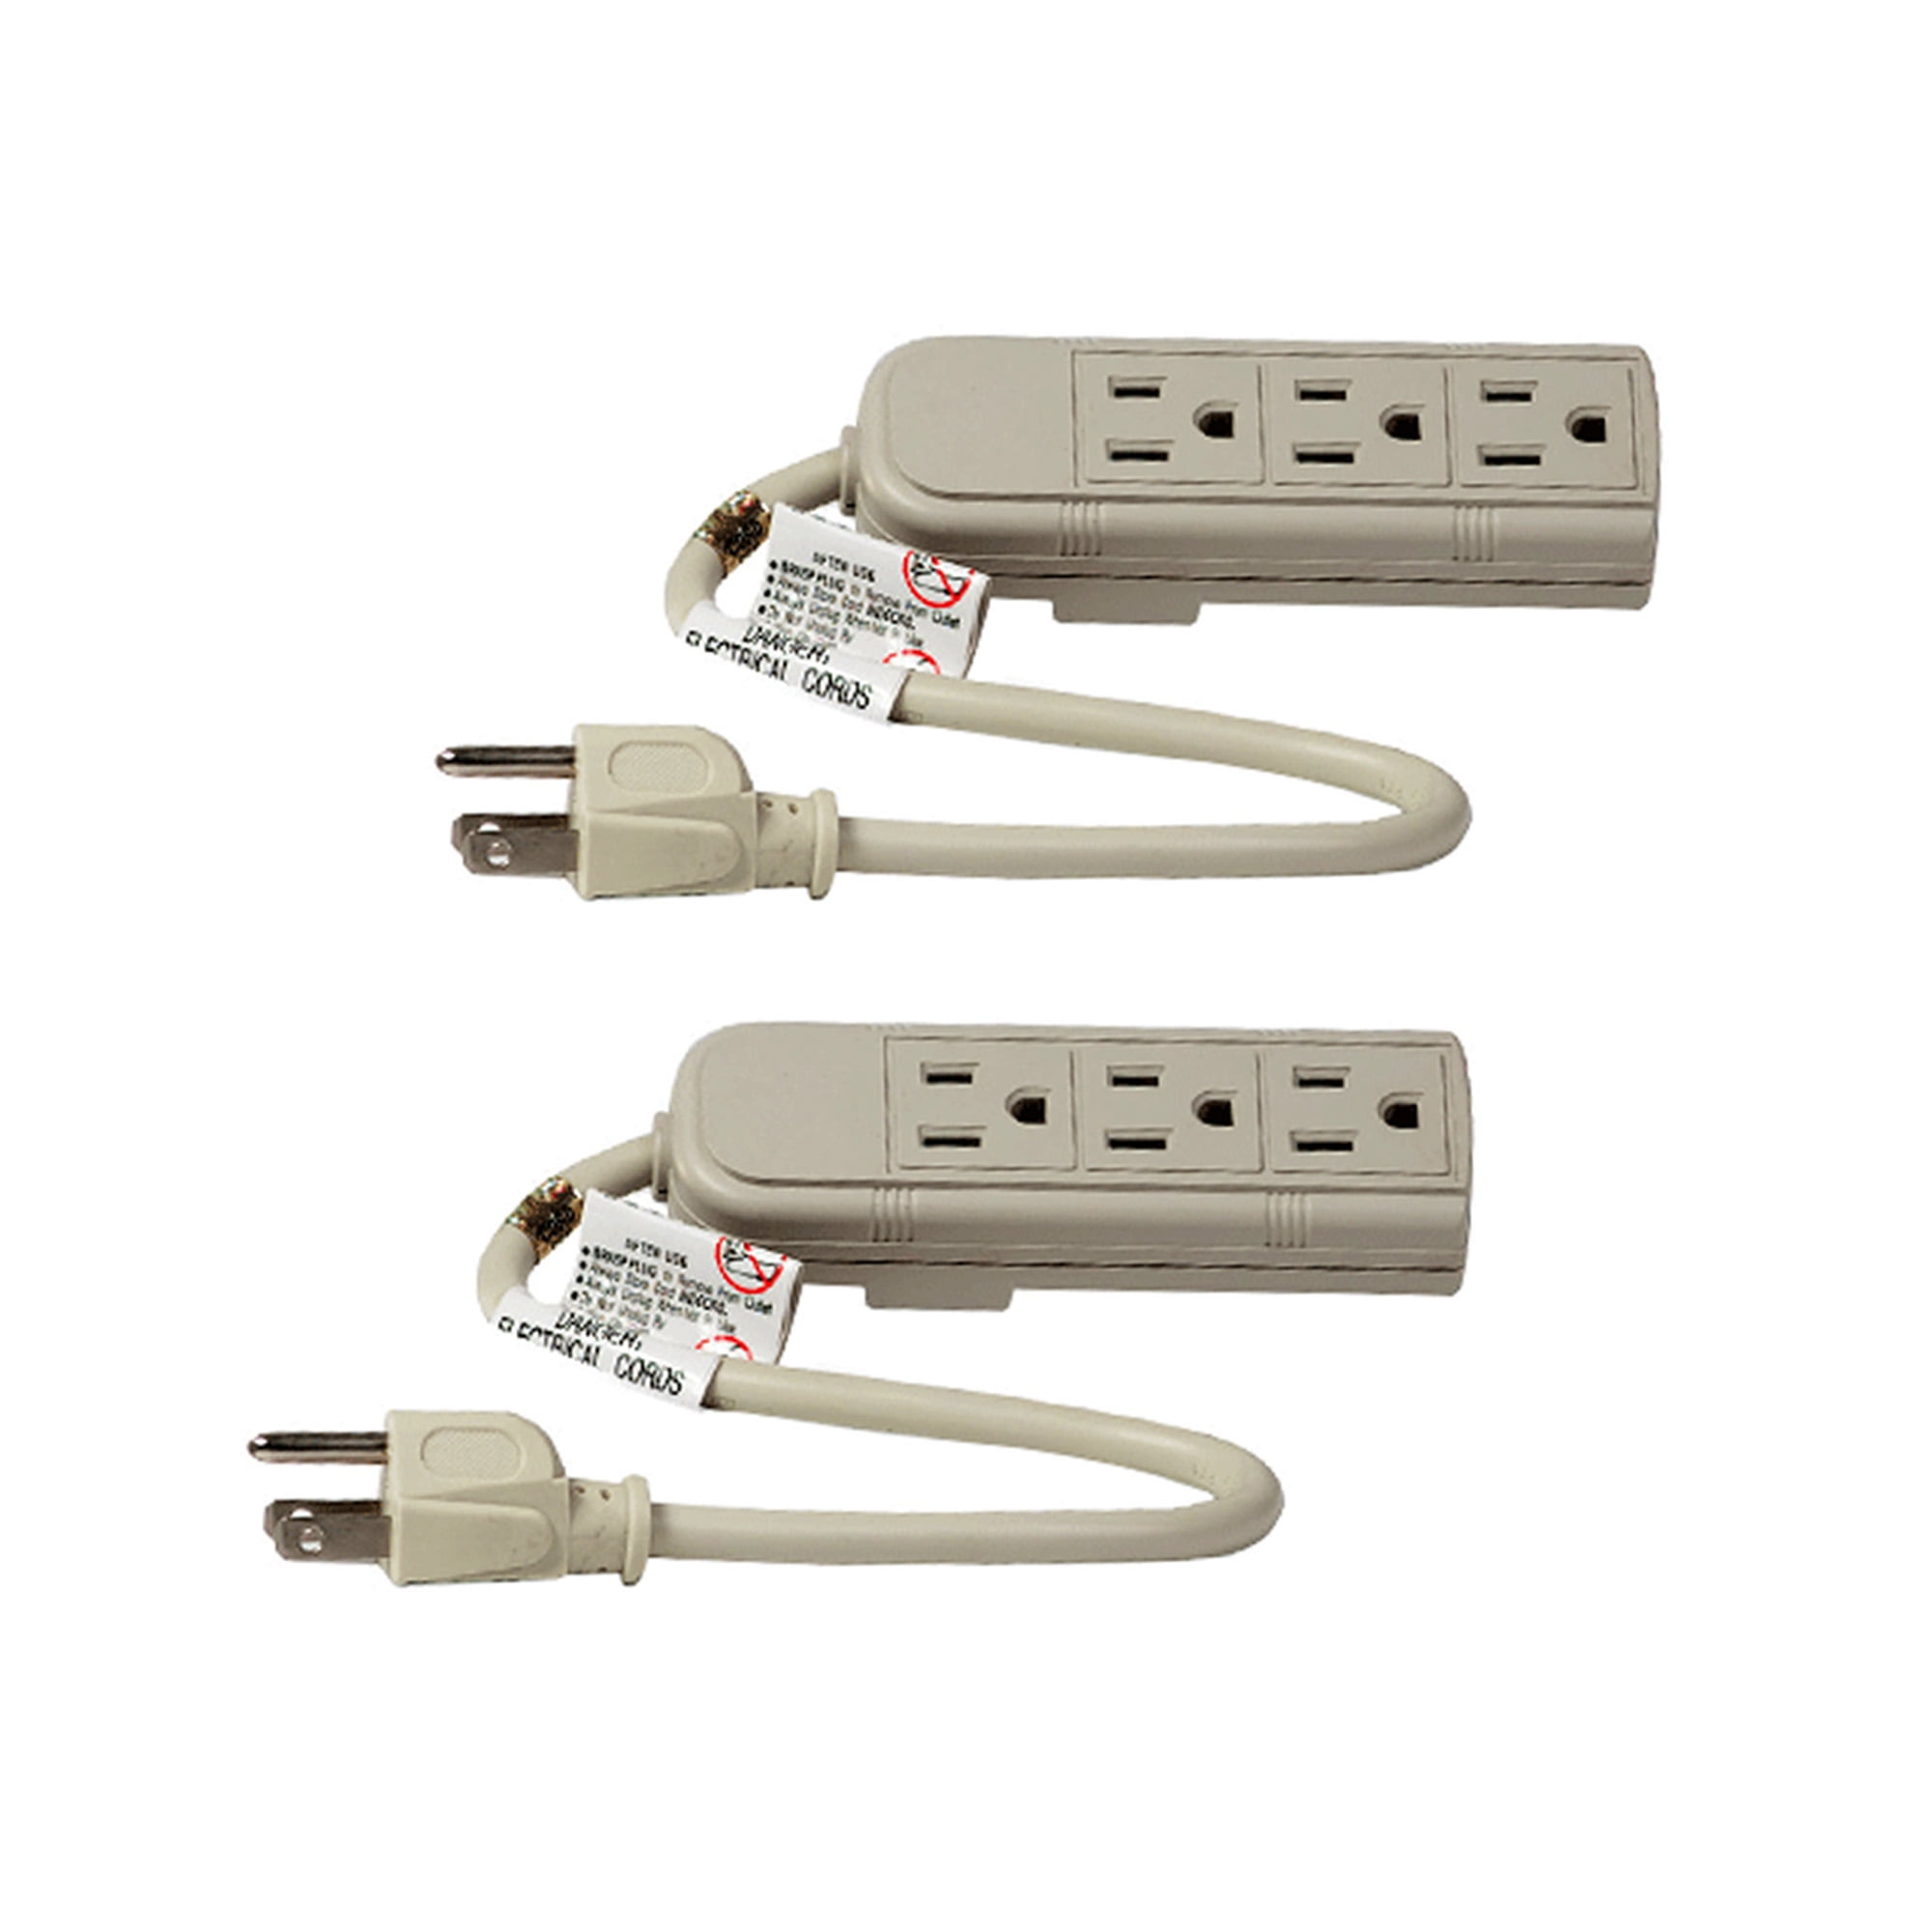 Uninex Power Strip Grounded Power Extension Cord 3Outlet-1ft-13A/125V/1625W 